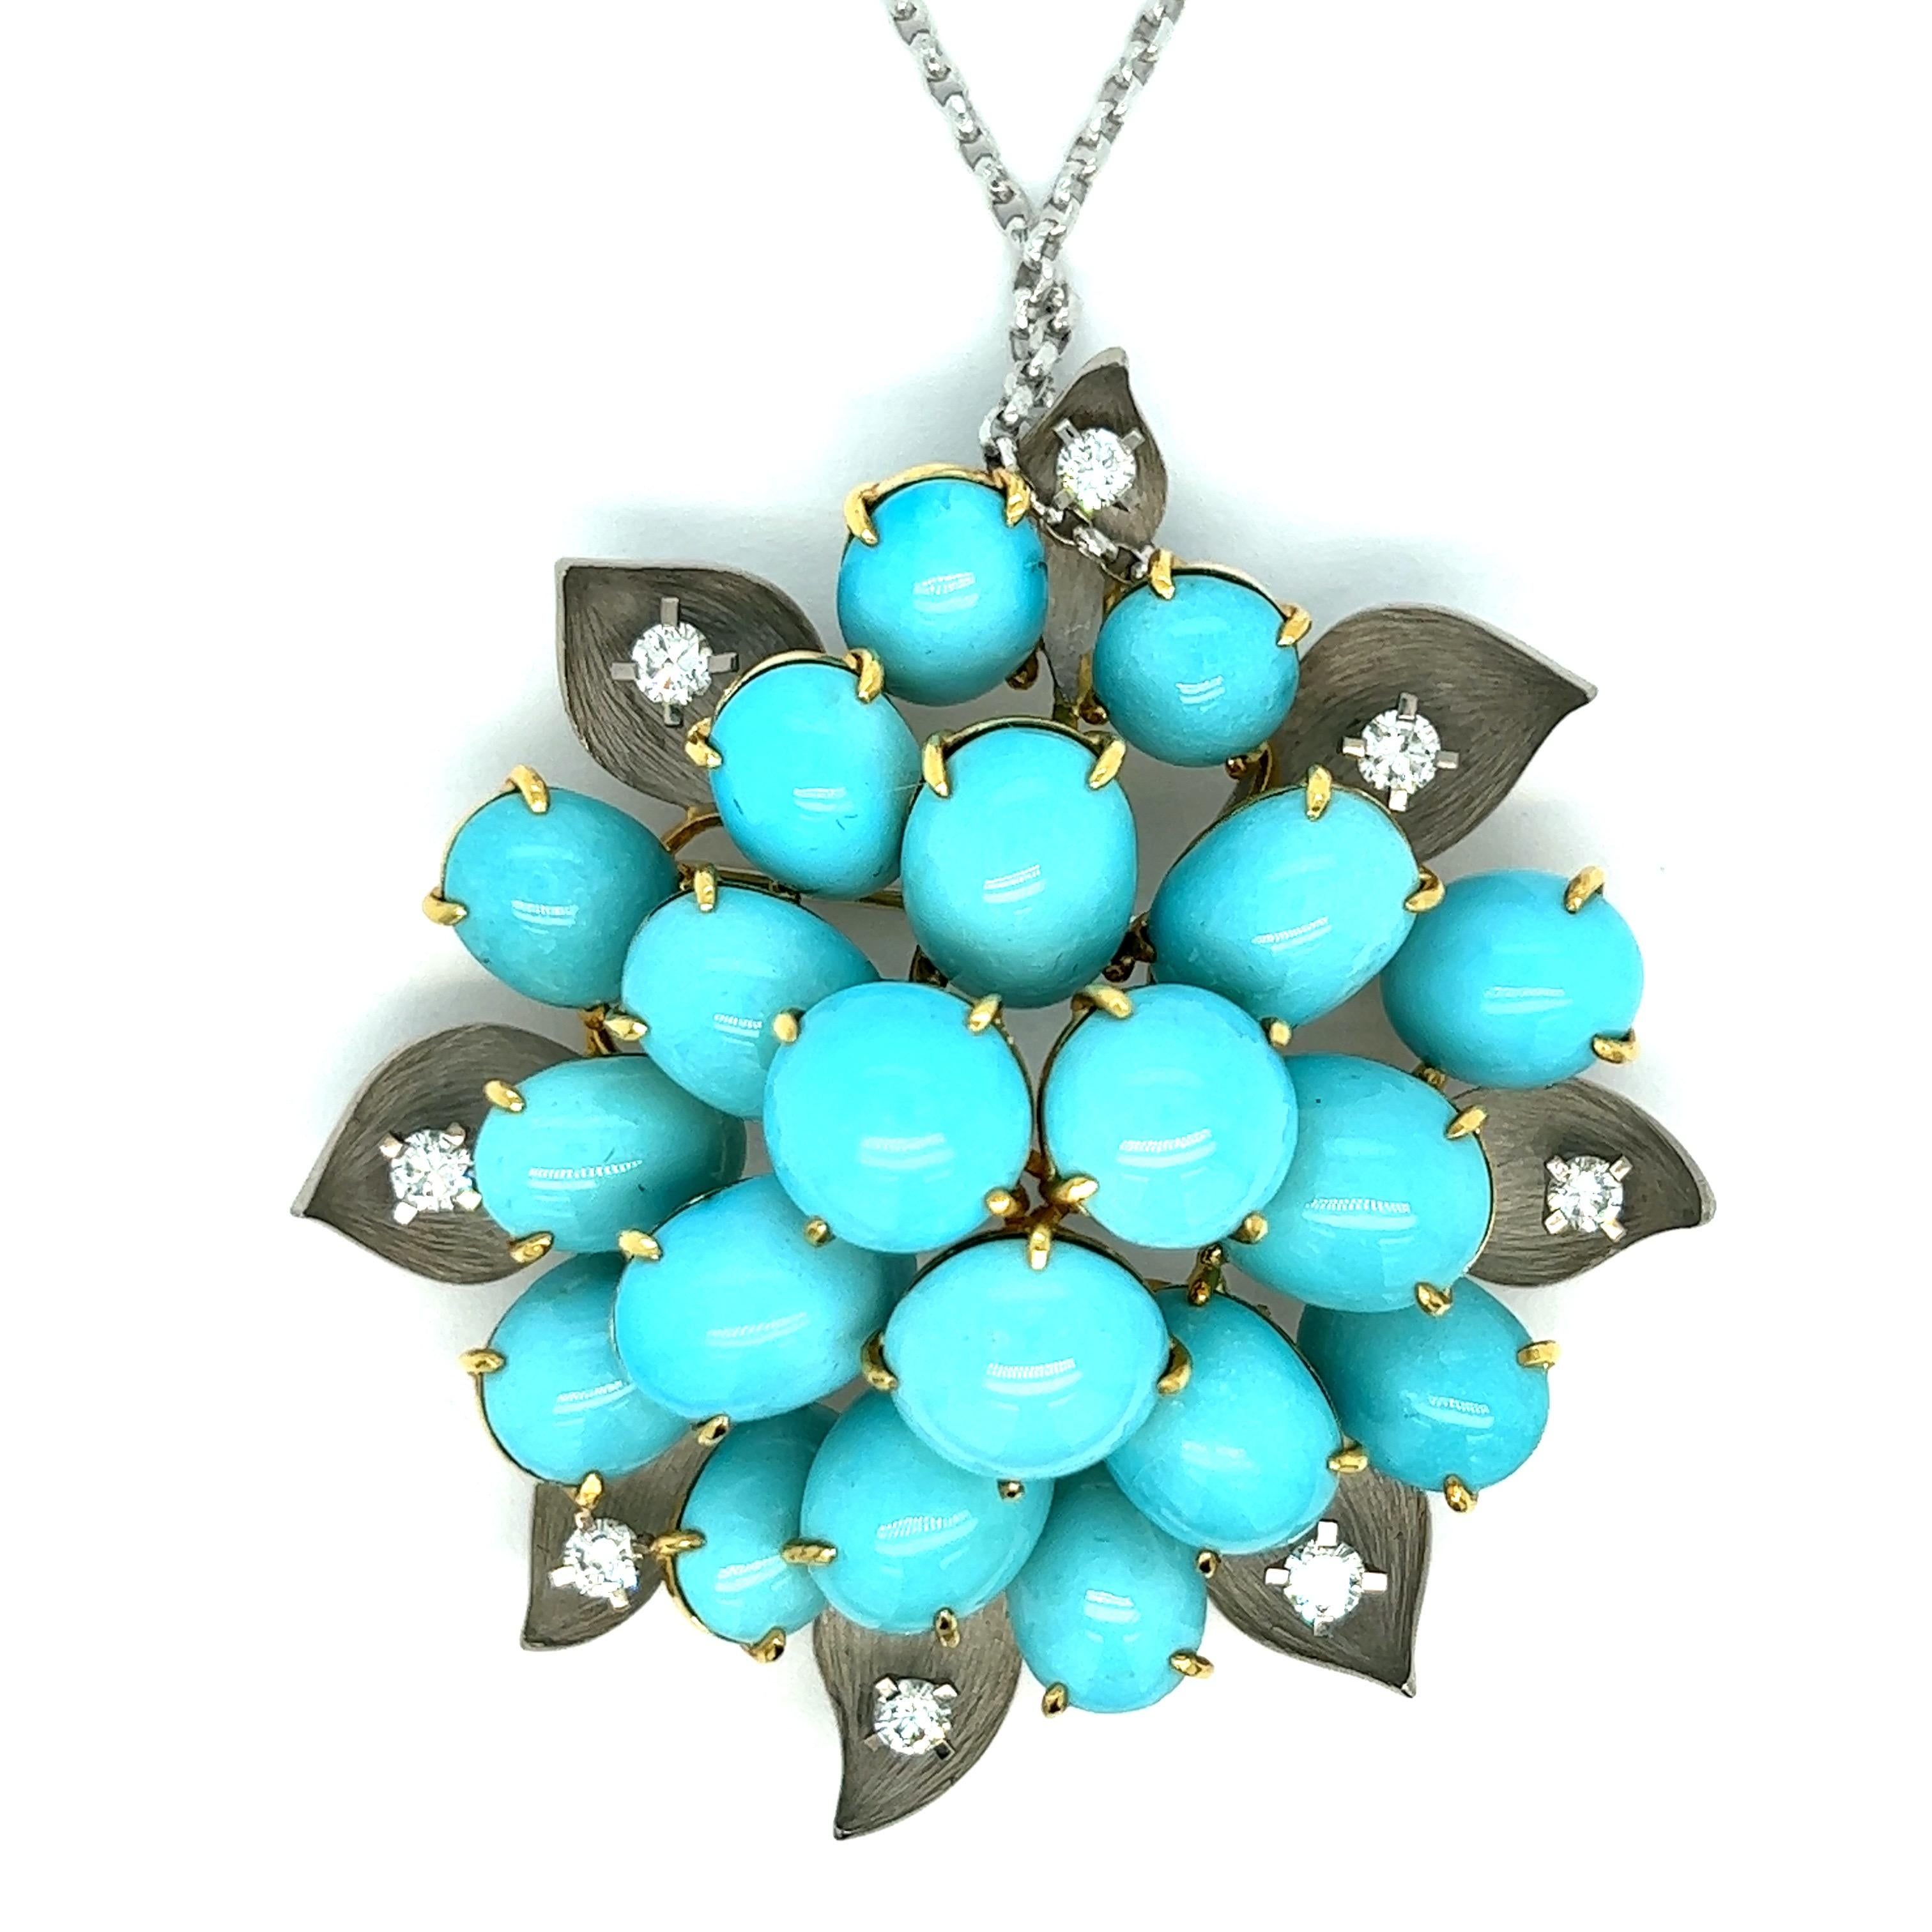 Turquoise diamond flower pendant necklace

White and clean round-cut diamonds of 1 carat, very fine turquoise stones of Persian origin, 18 karat yellow and white gold; marked 750

Can be converted into a brooch

Size: pendant width 2.13 inches,